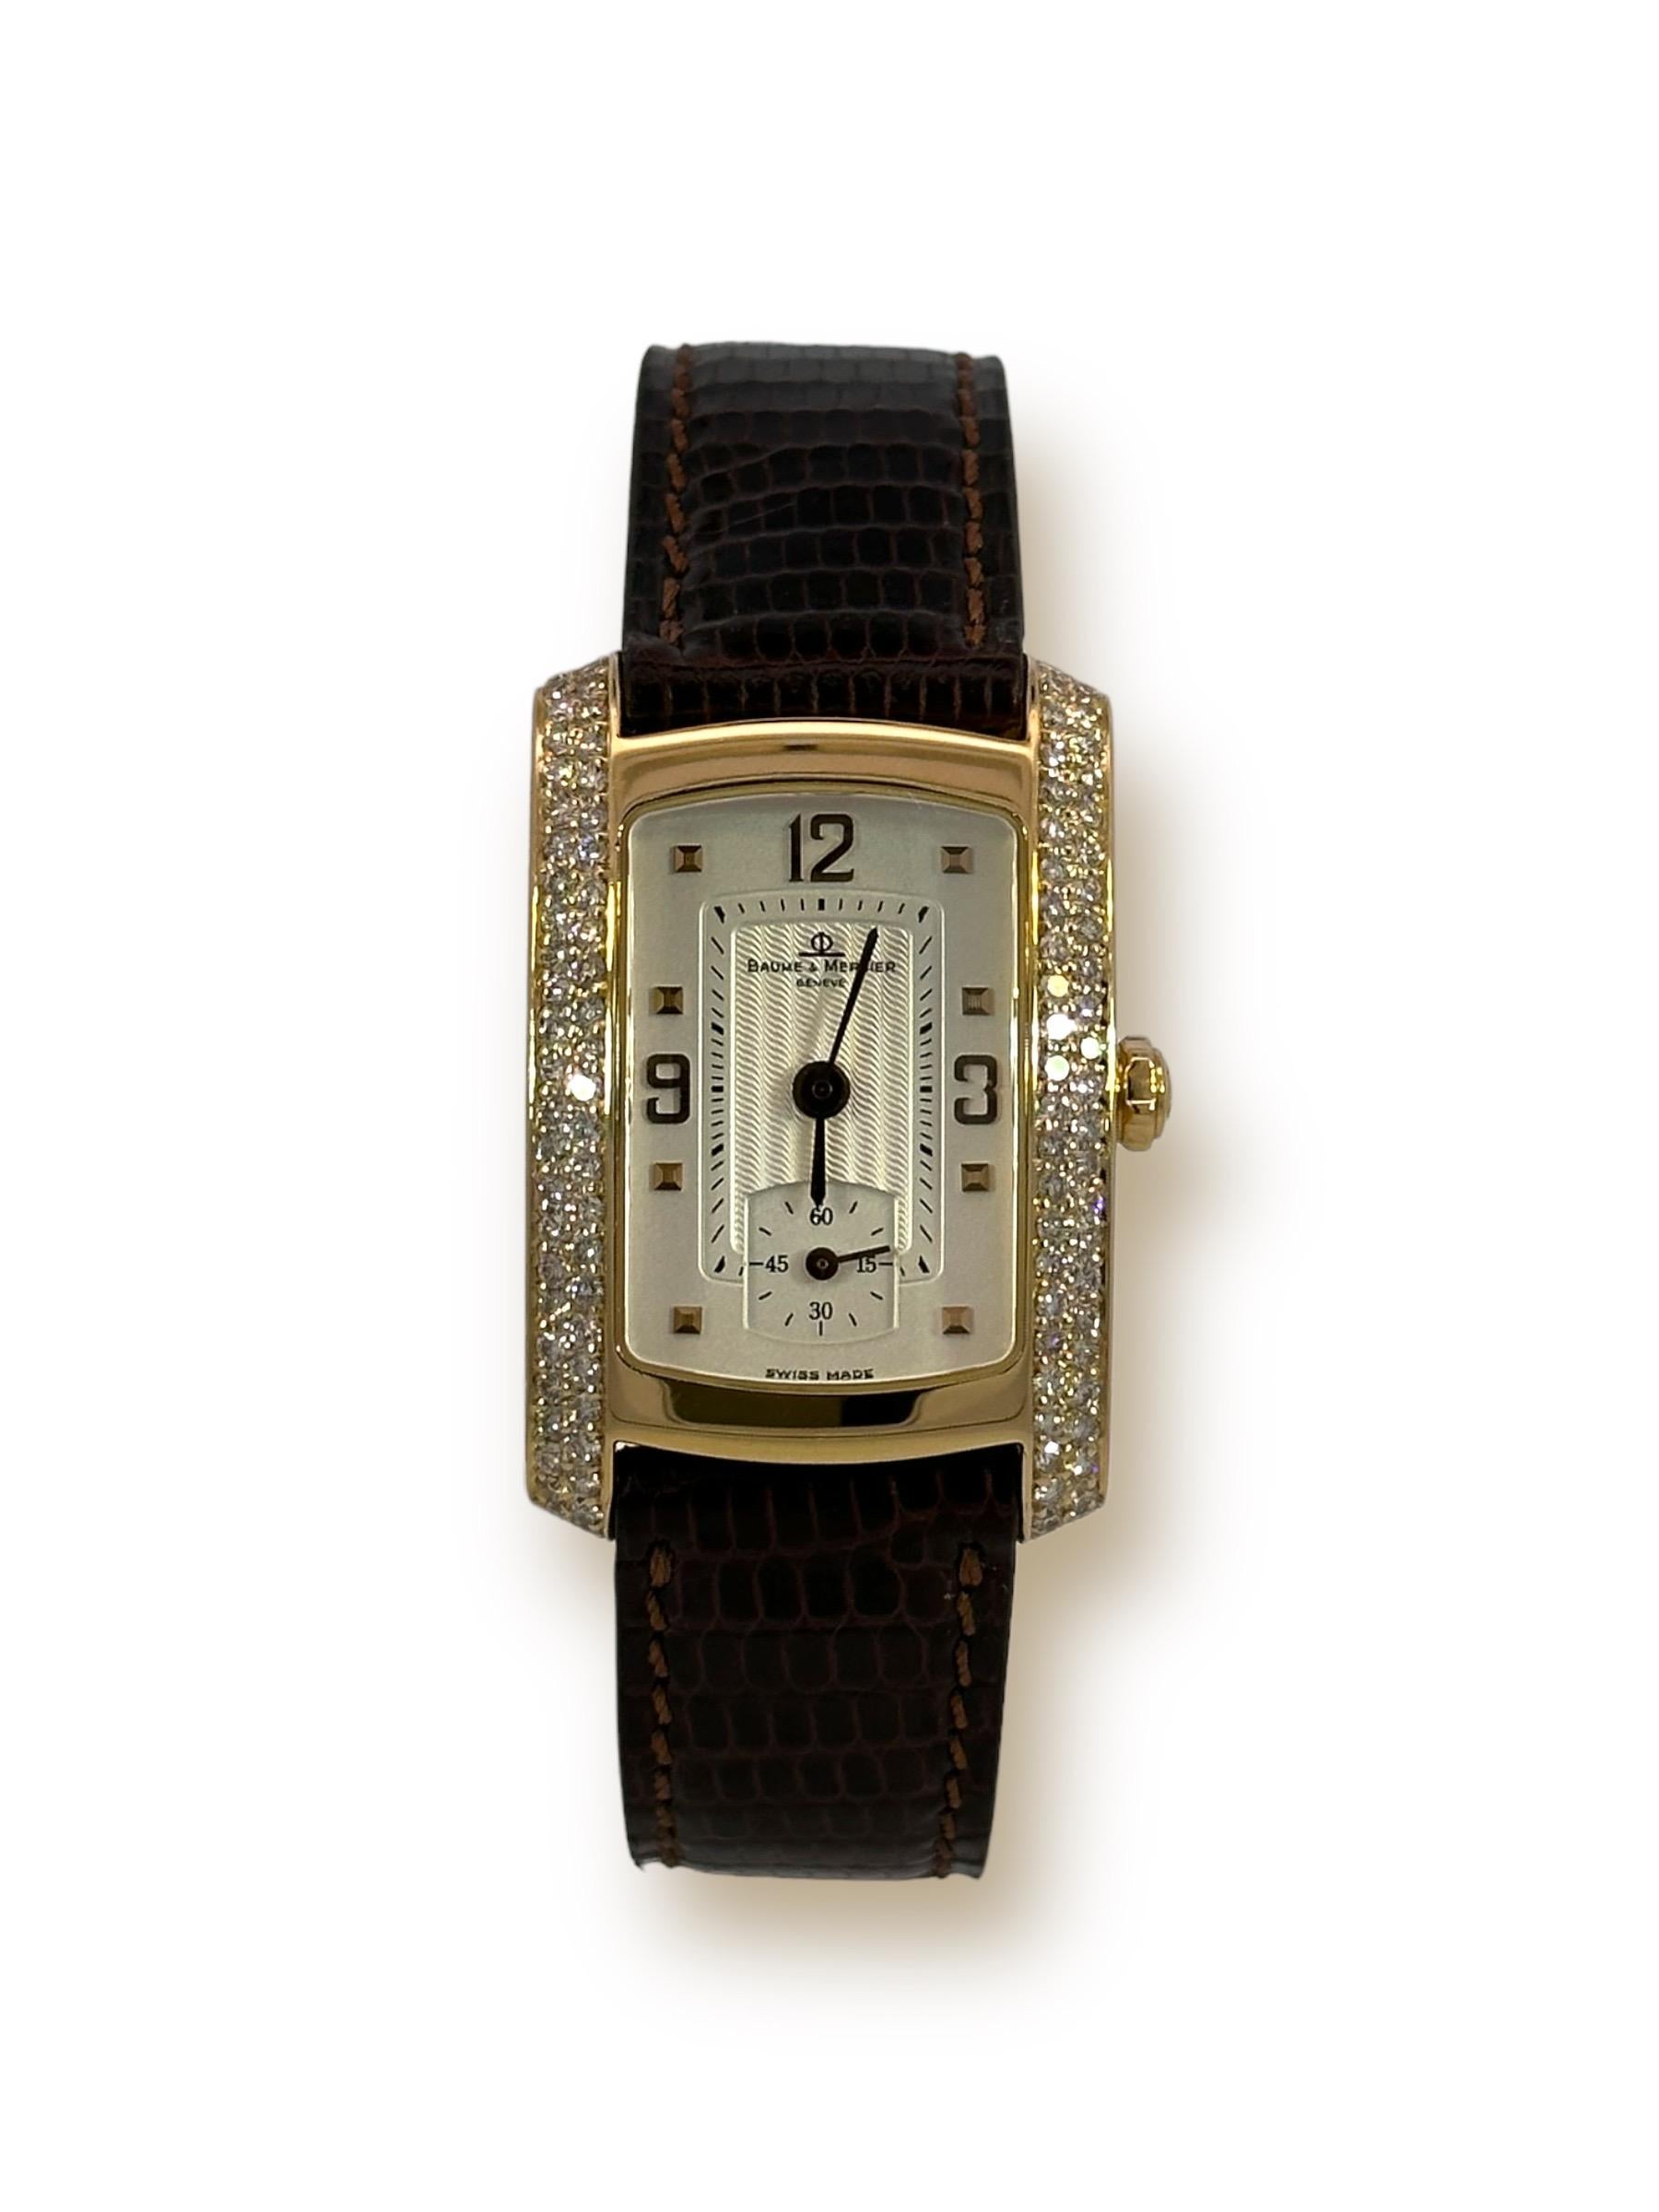 18kt Yellow Gold Baume & Mercier Hampton Diamonds Wrist Watch

Model ref number: MVO45229

Movement: Quartz

Functions: Hours, Minutes, Small second counter

Case: 18kt Yellow gold rectangle case 22mm x 27.5 mm x 6.8mm, Bezel set with